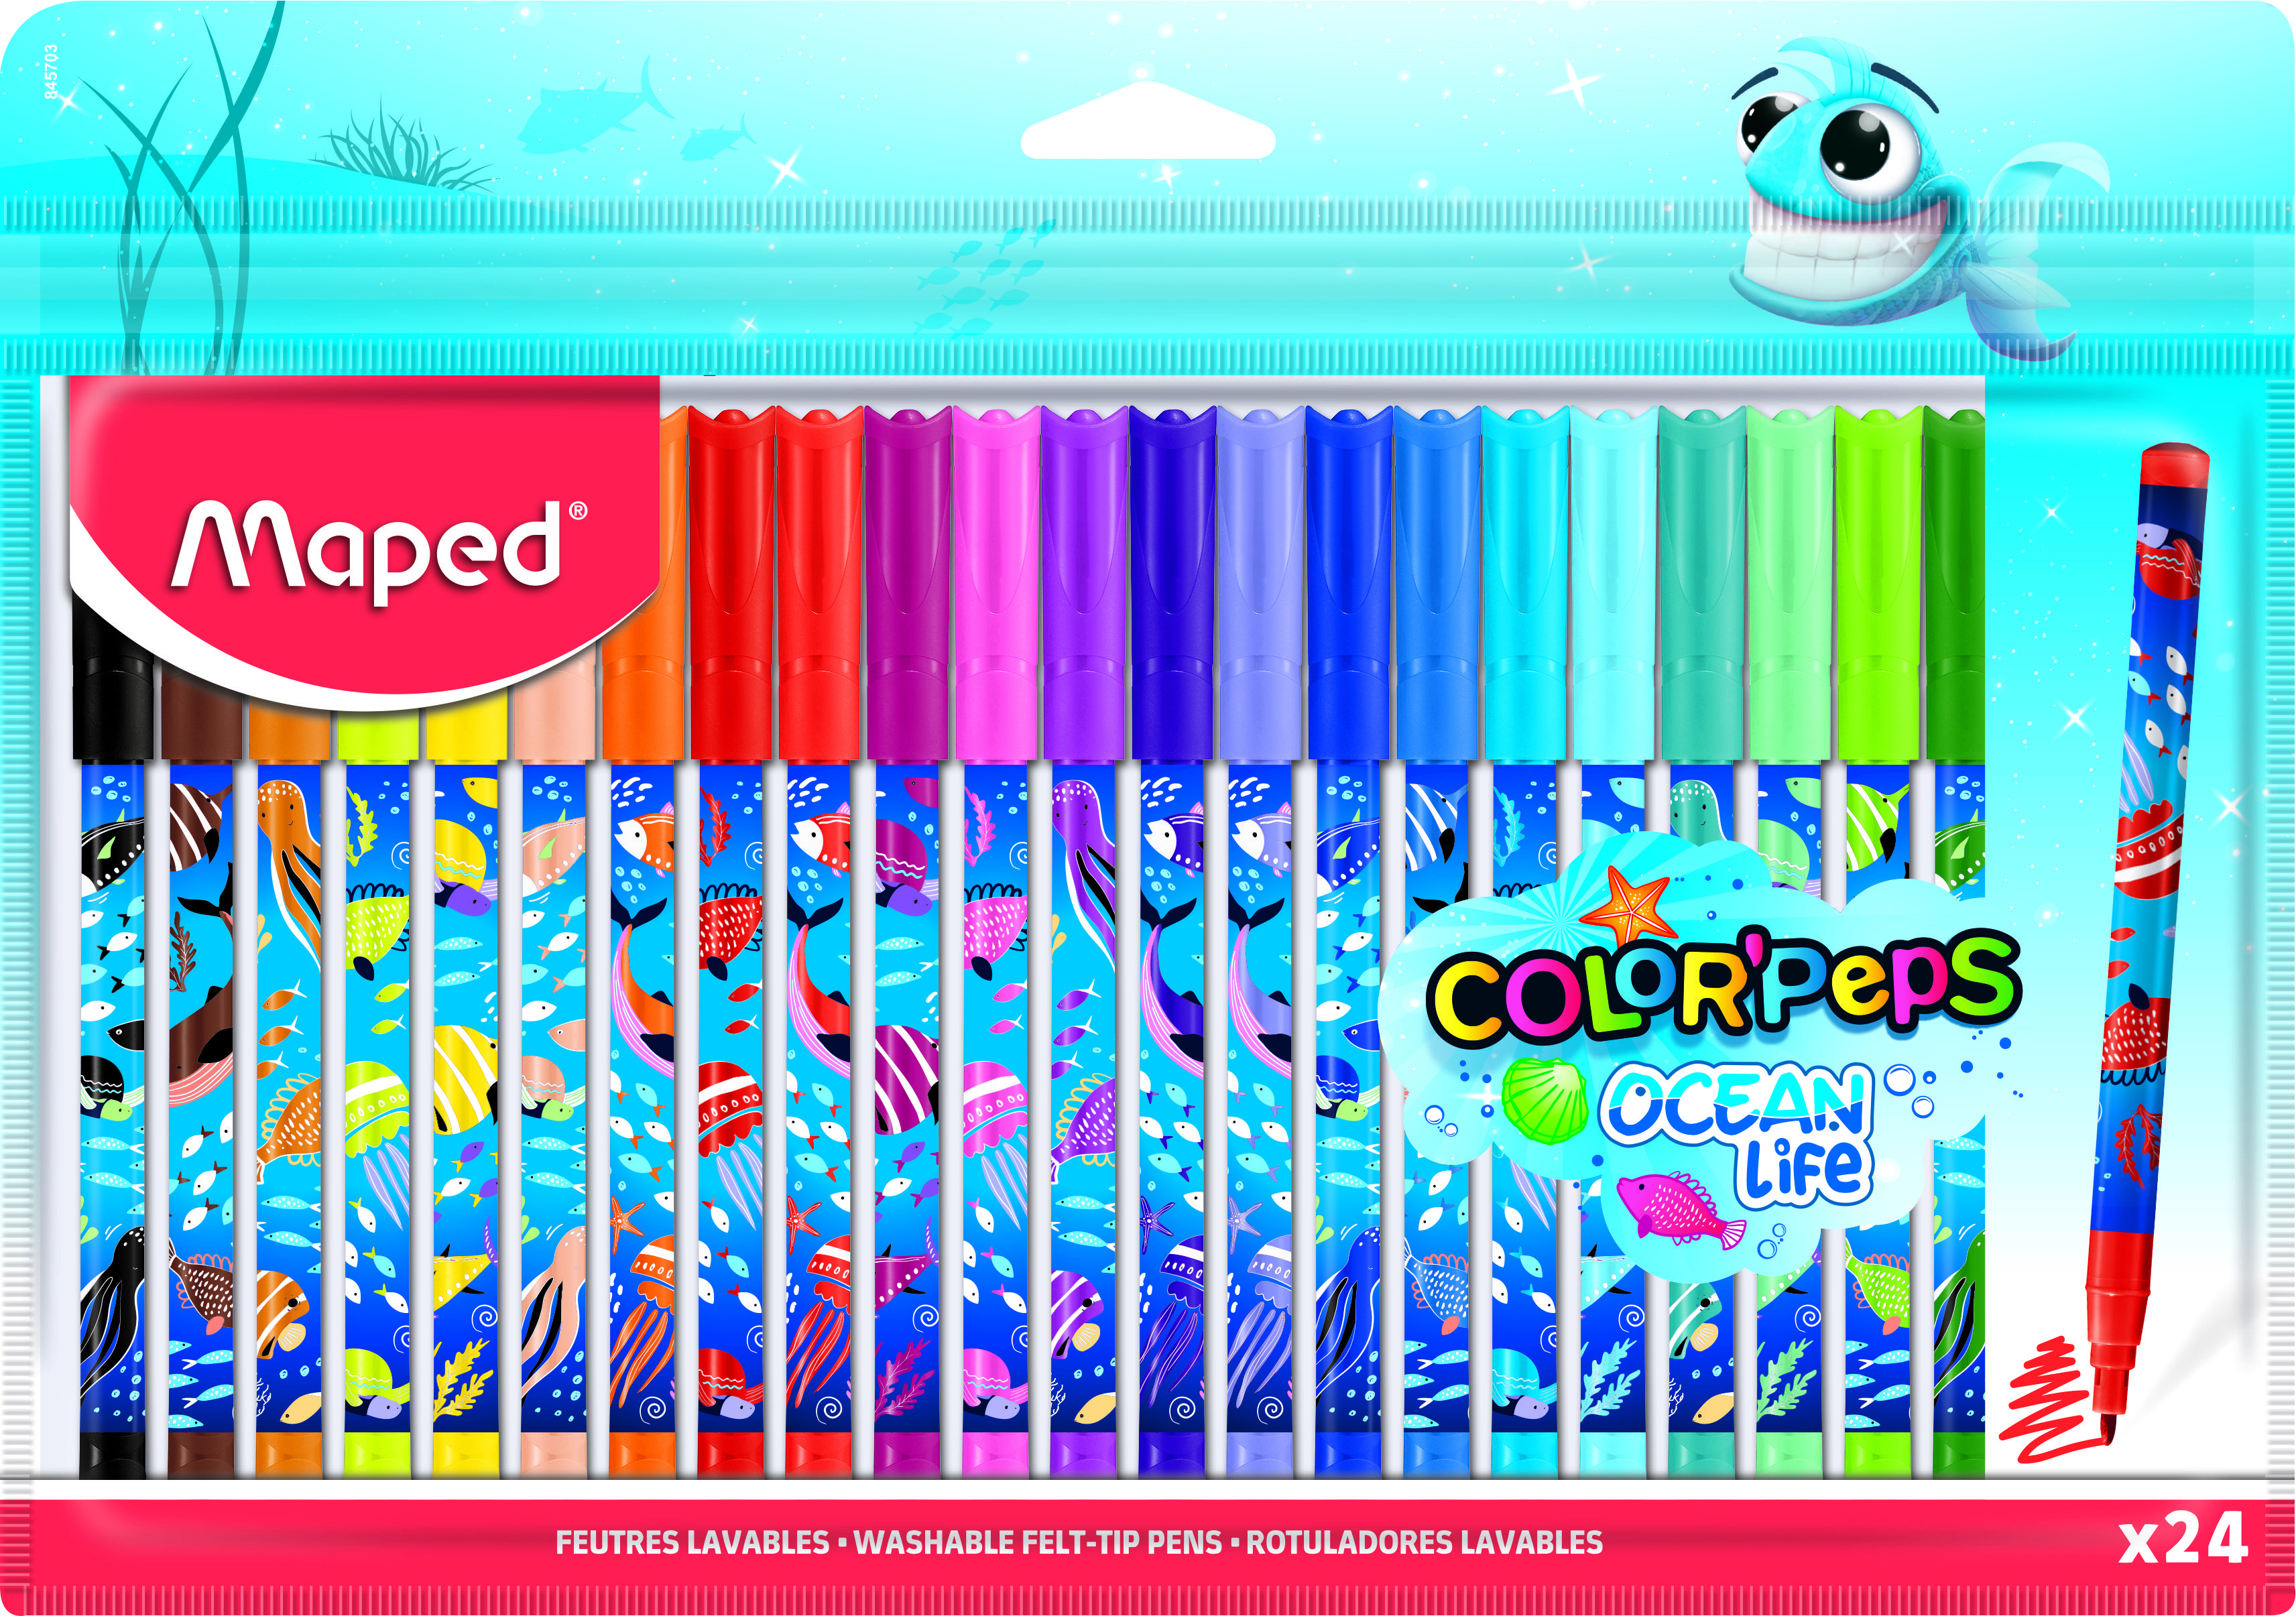  MAPED COLOR'PEPS OCEAN LIFE  24           